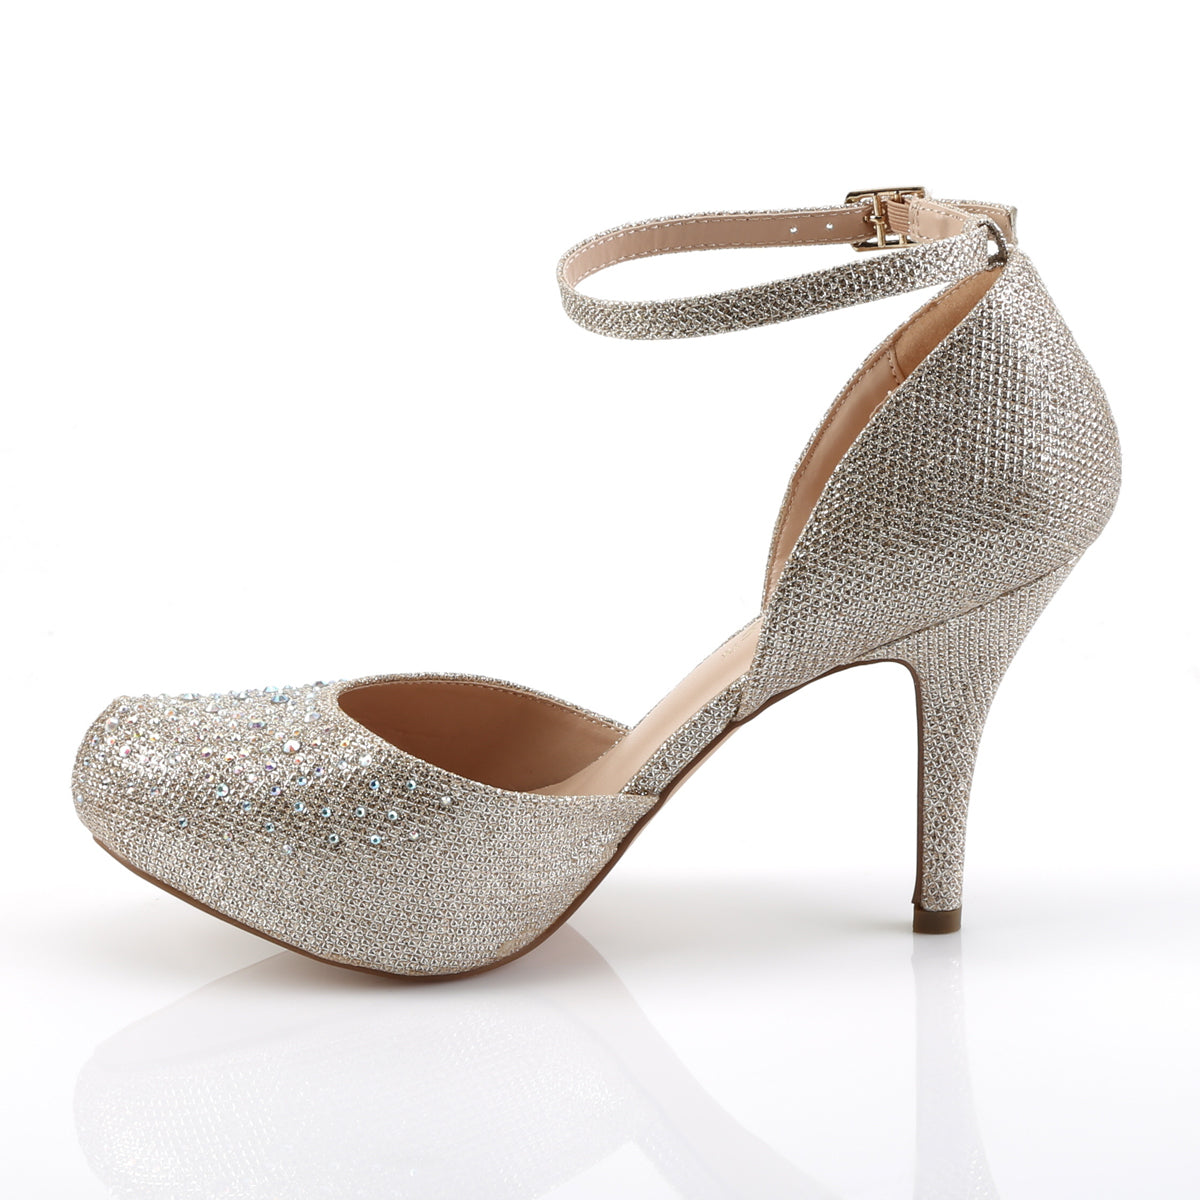 COVET-03 Fetish Nude Glitter Mesh Fabric Sexy Shoes Heels-Fabulicious- Sexy Shoes Pole Dance Heels